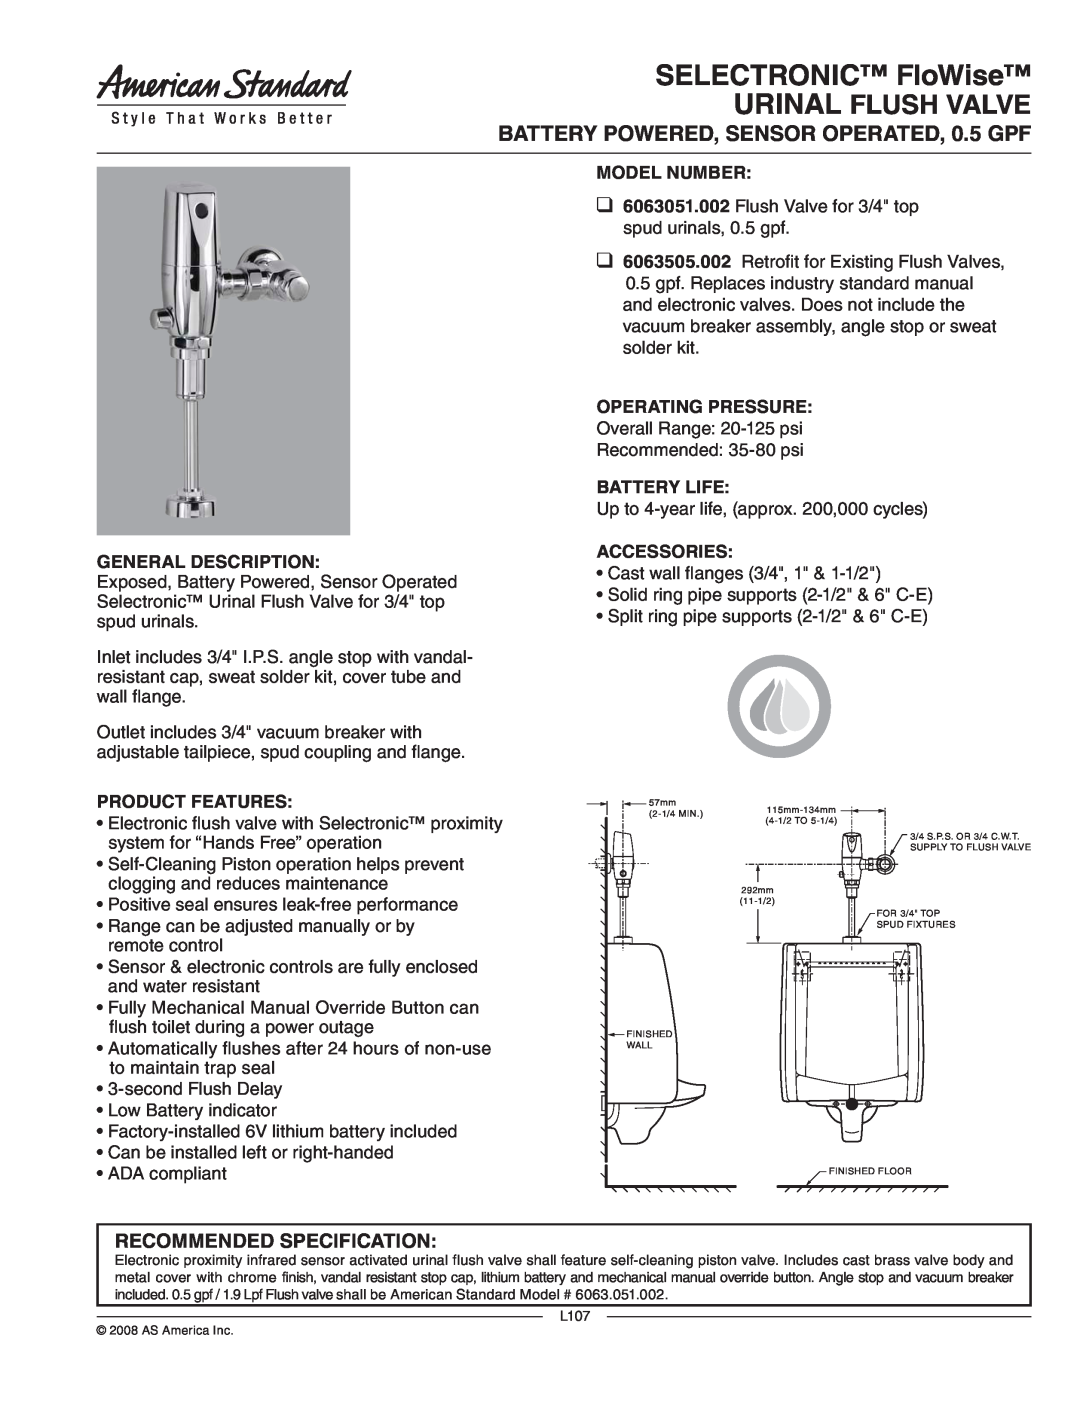 American Standard 6063505.002 manual SELECTRONIC FloWise, Urinal Flush Valve, Recommended Specification, Product Features 